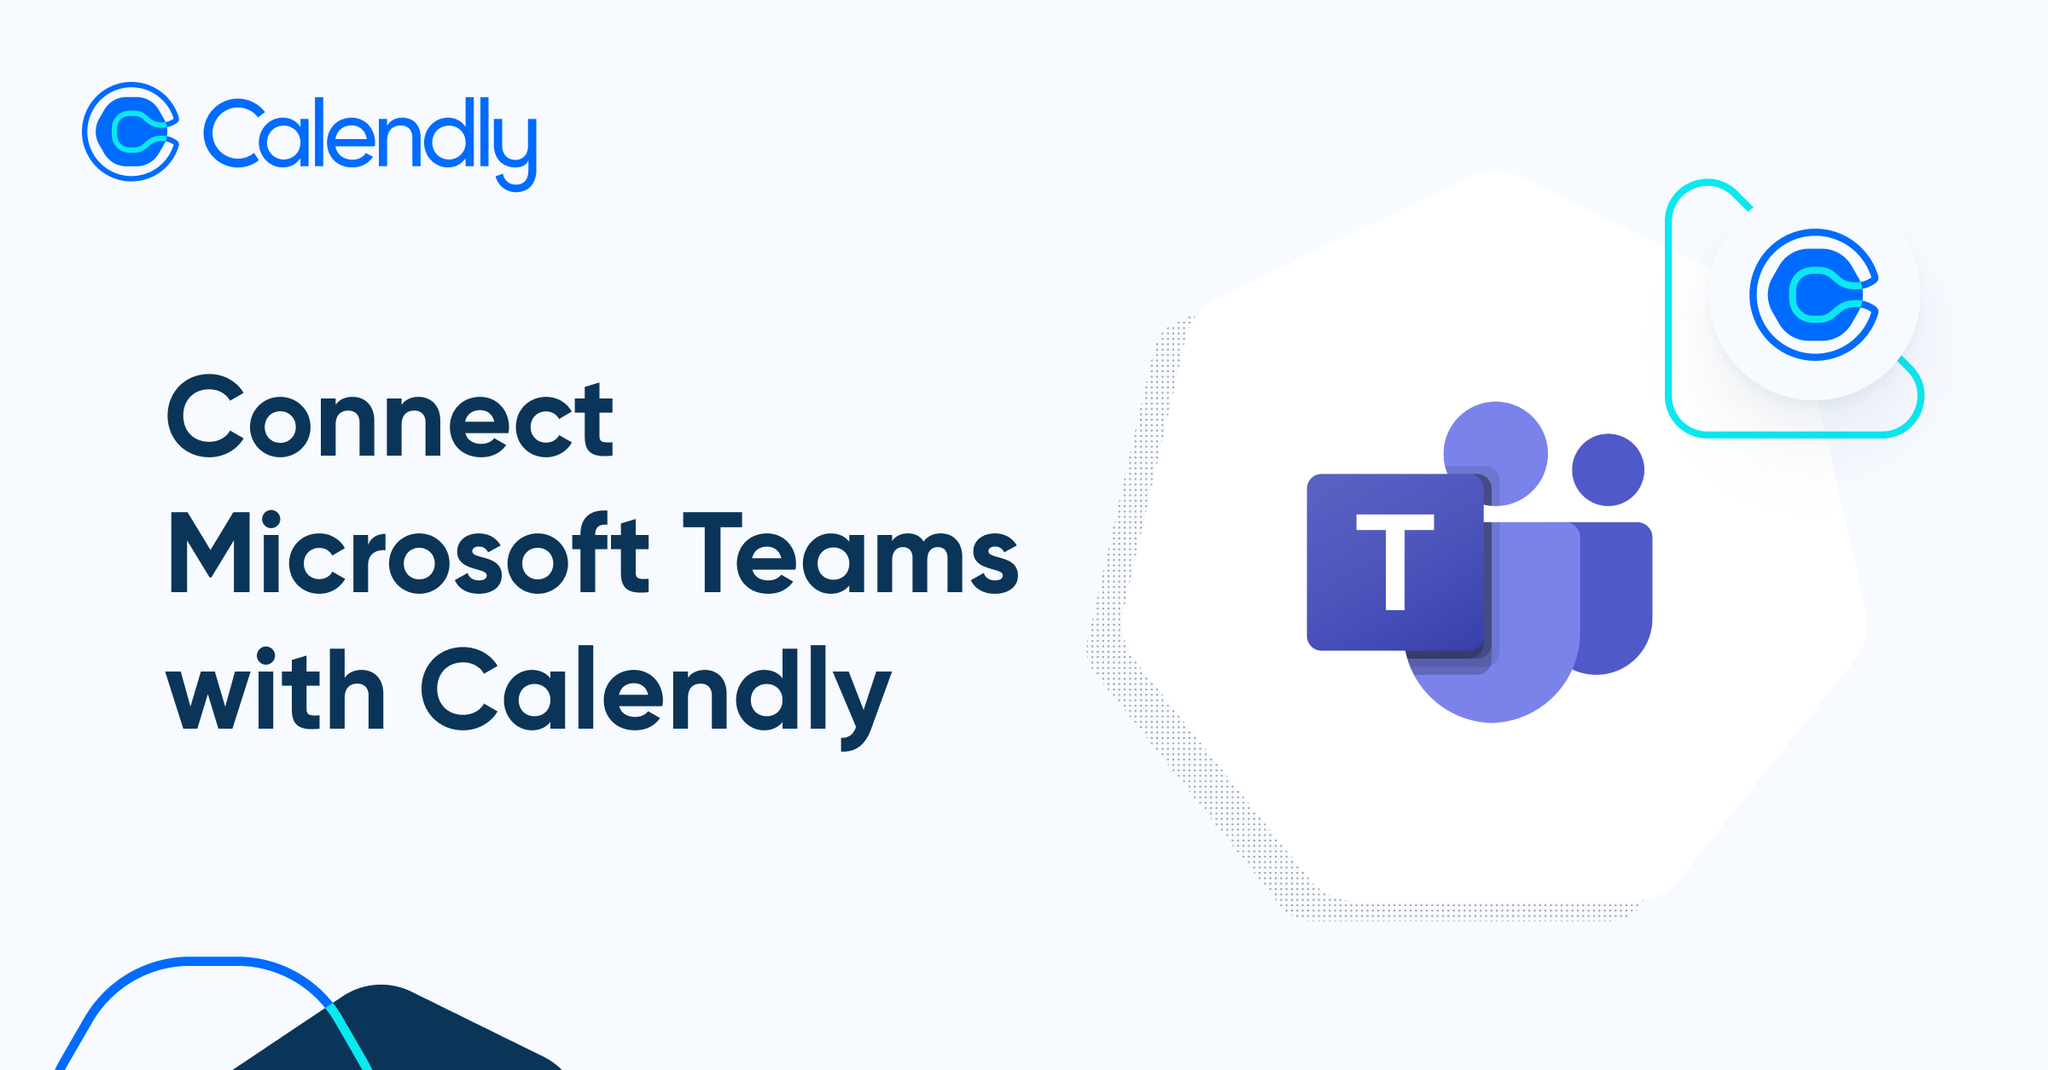 Does Calendly Work With Microsoft Teams?